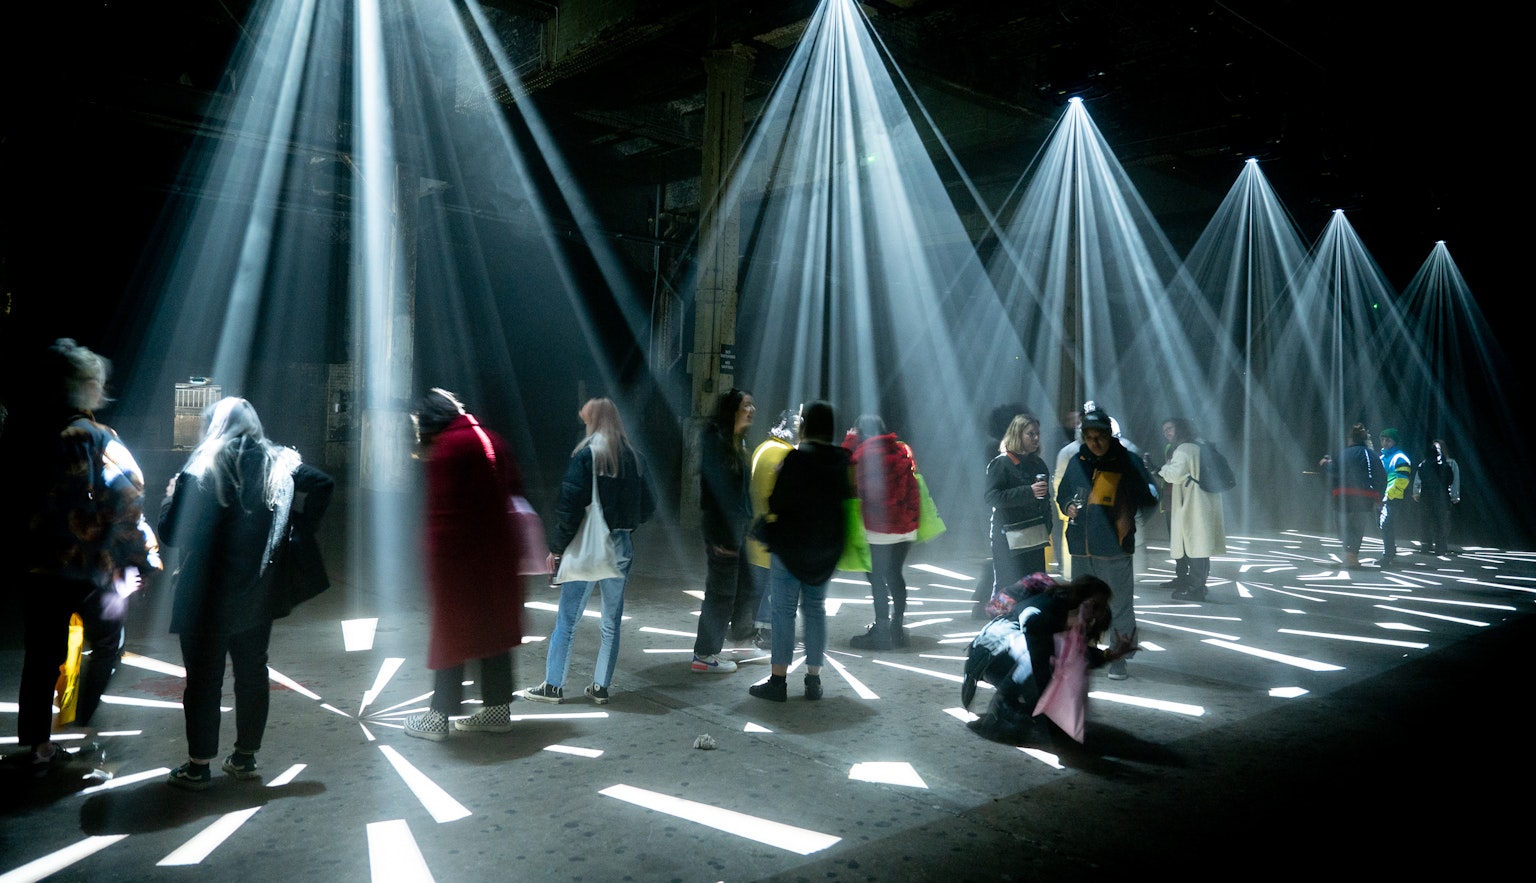 A group of fifteen people are stood under projections of light in a dark space.